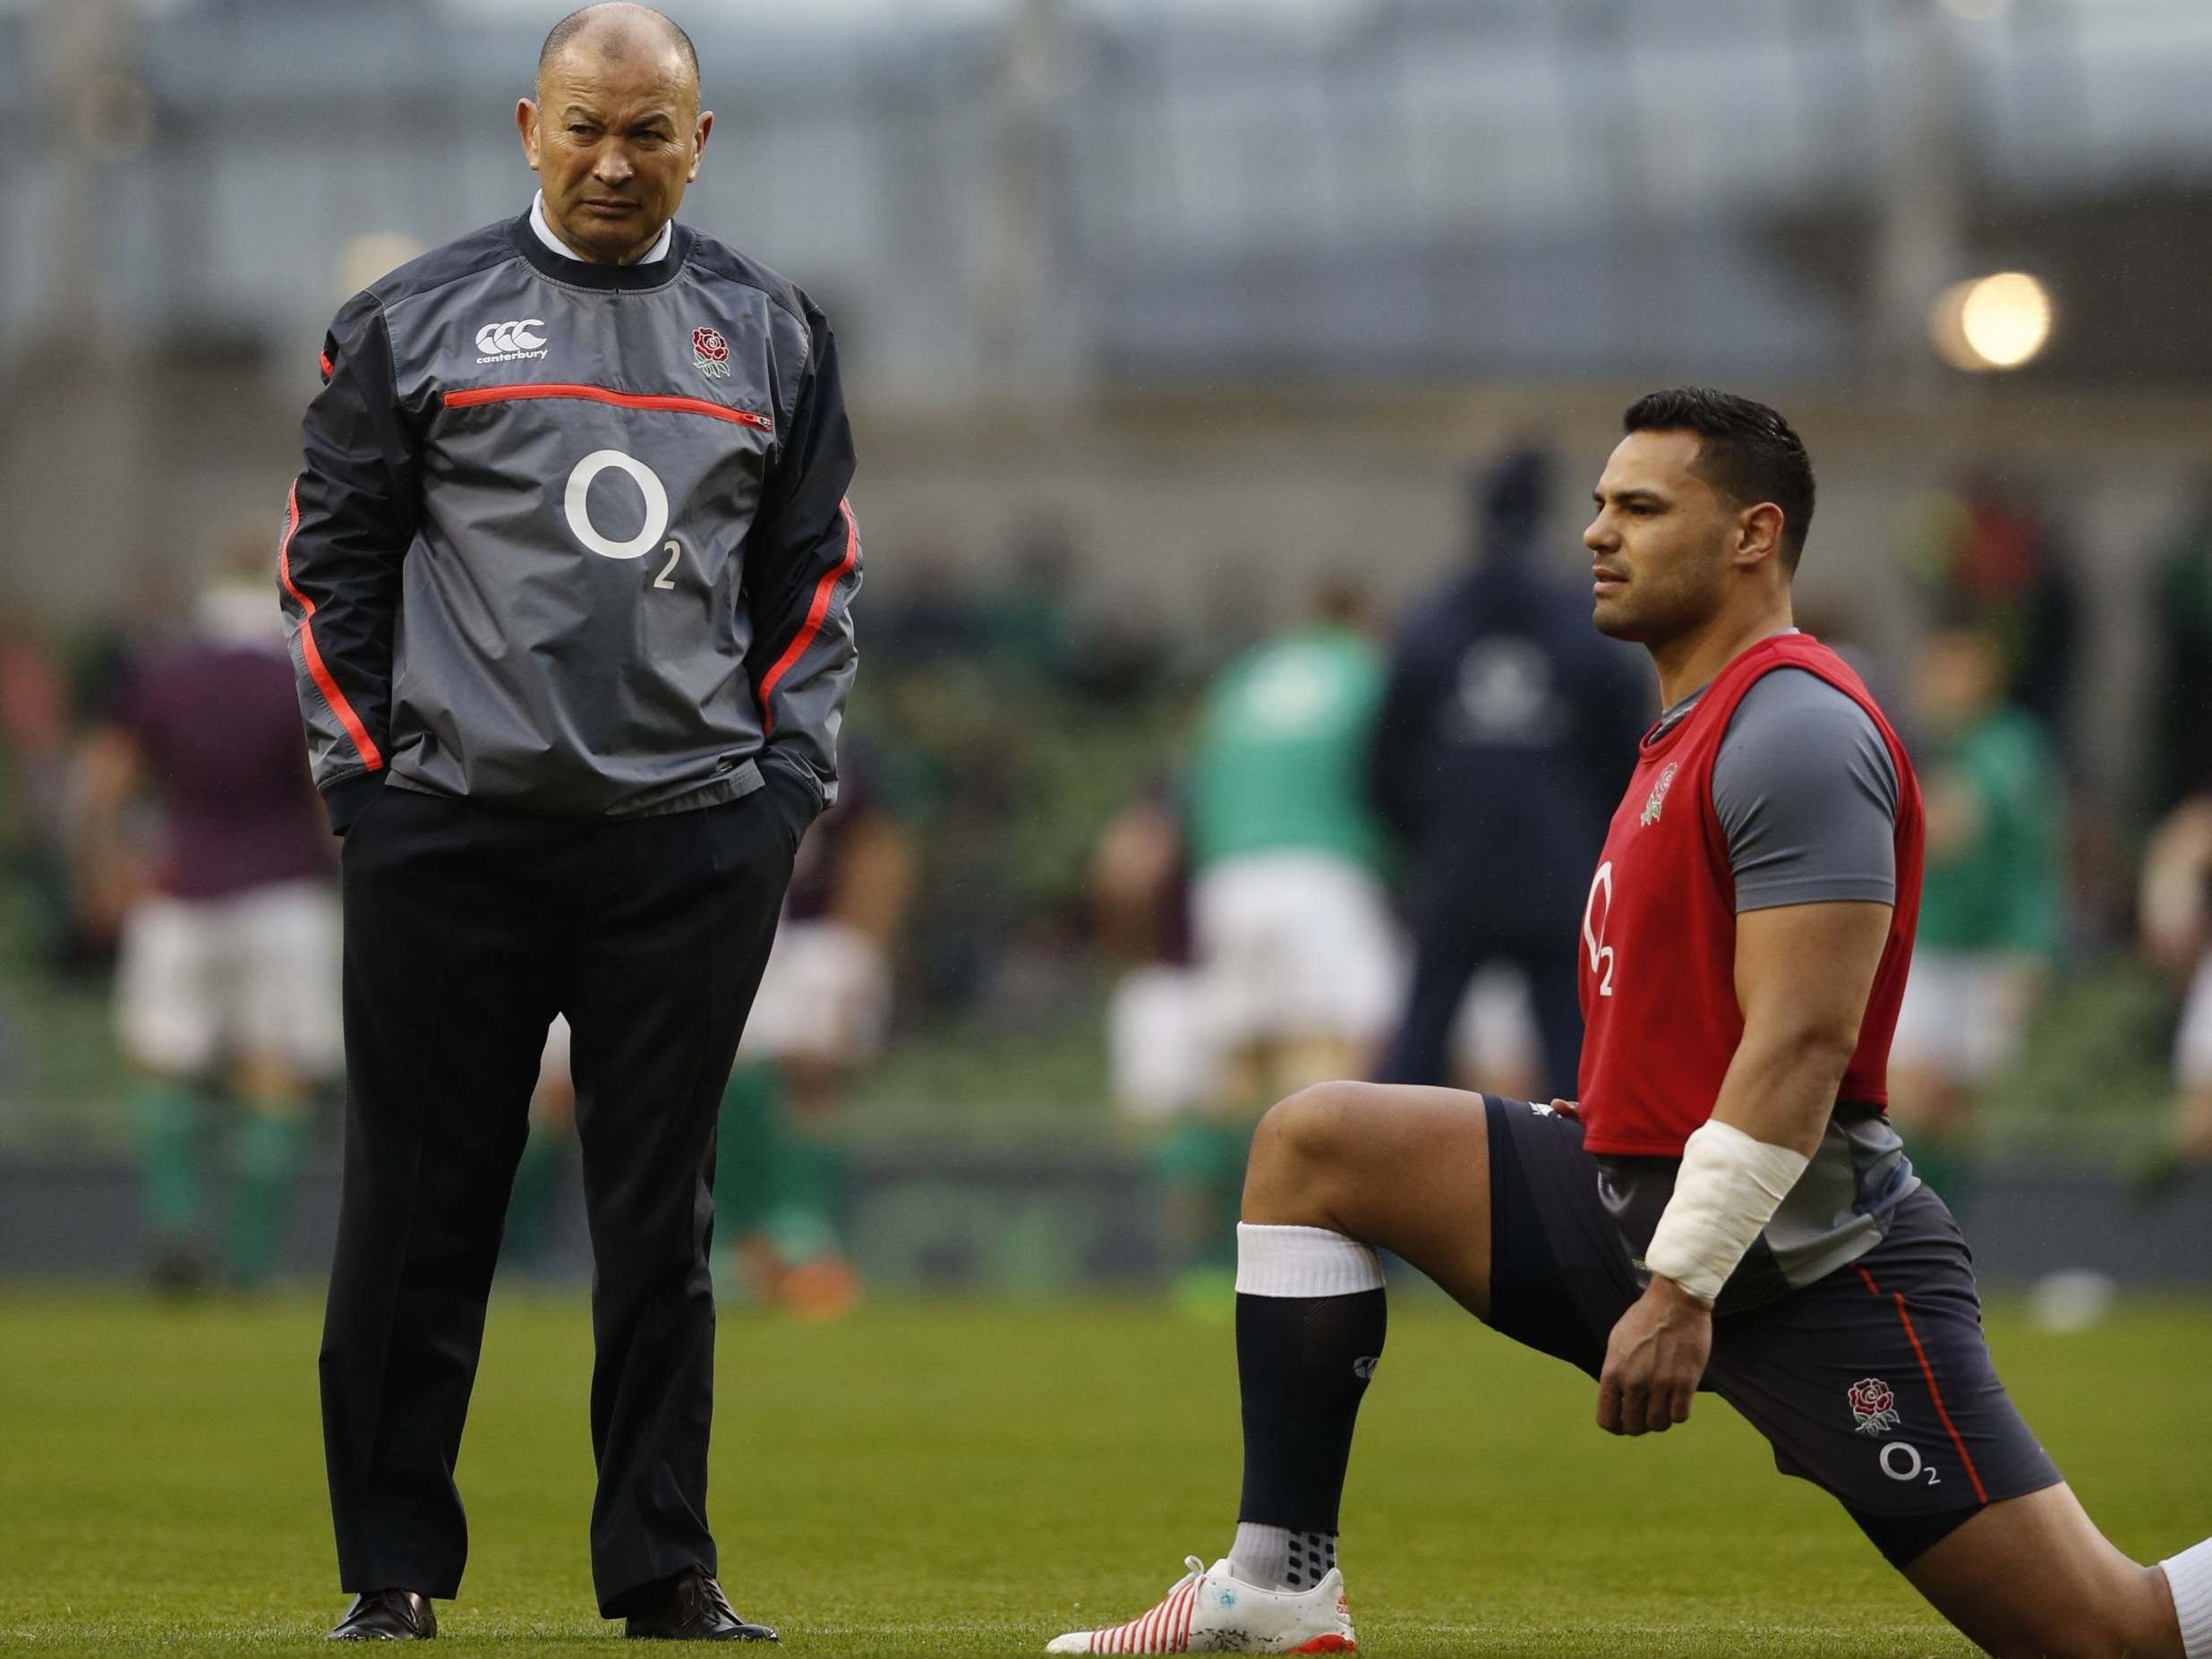 Te'o will not be available for England during the World Cup